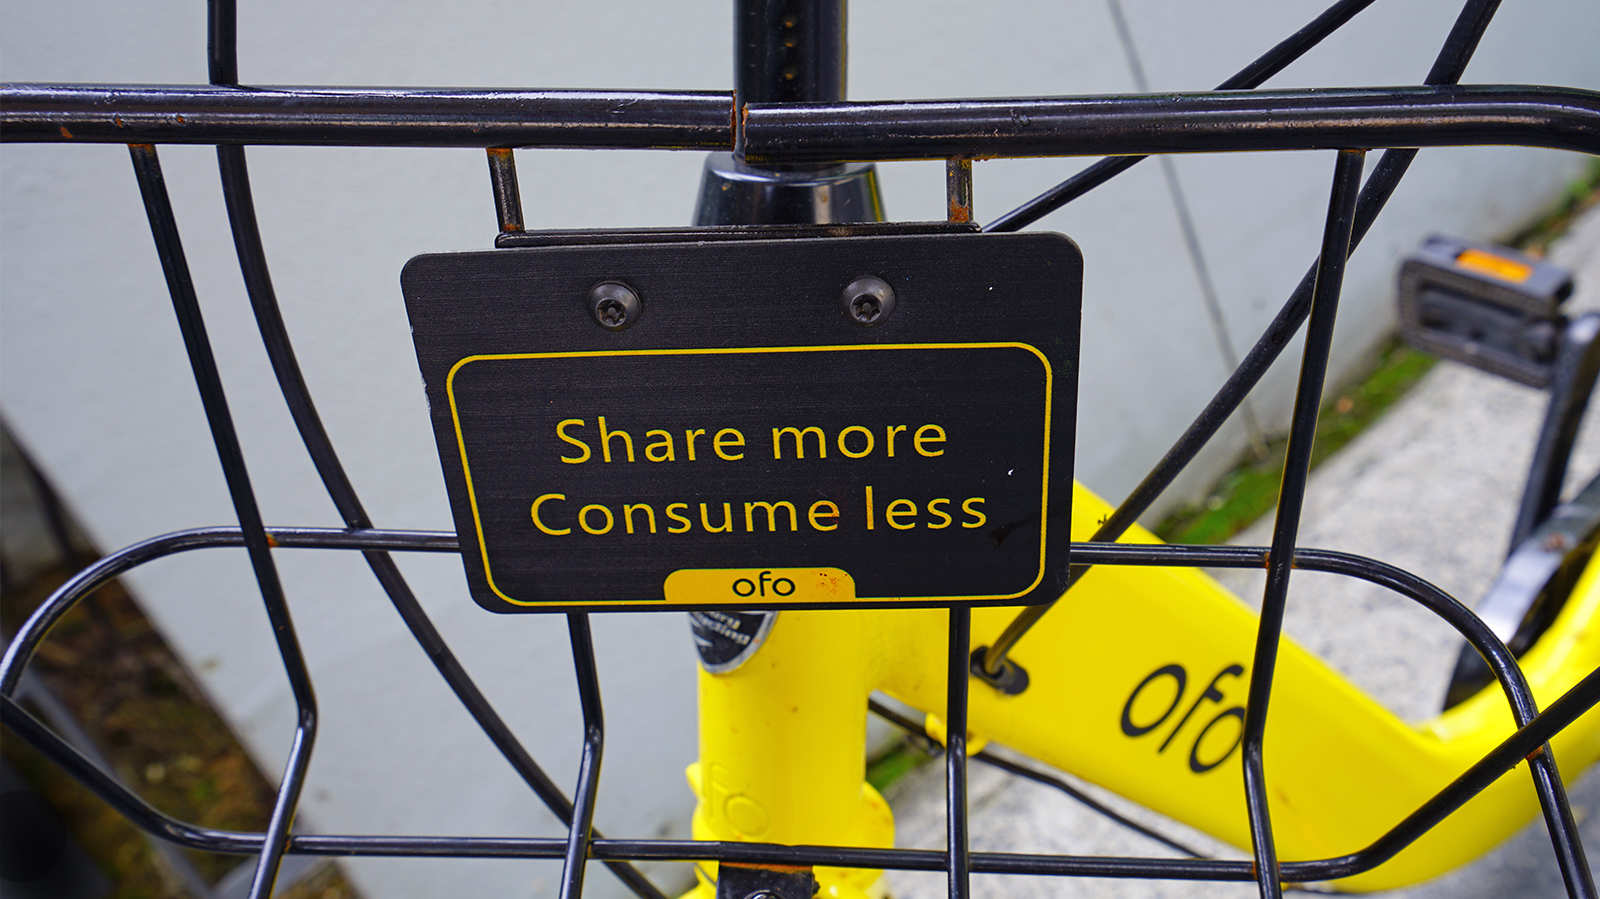 Has the sharing economy distorted the meaning and spirit of sharing?